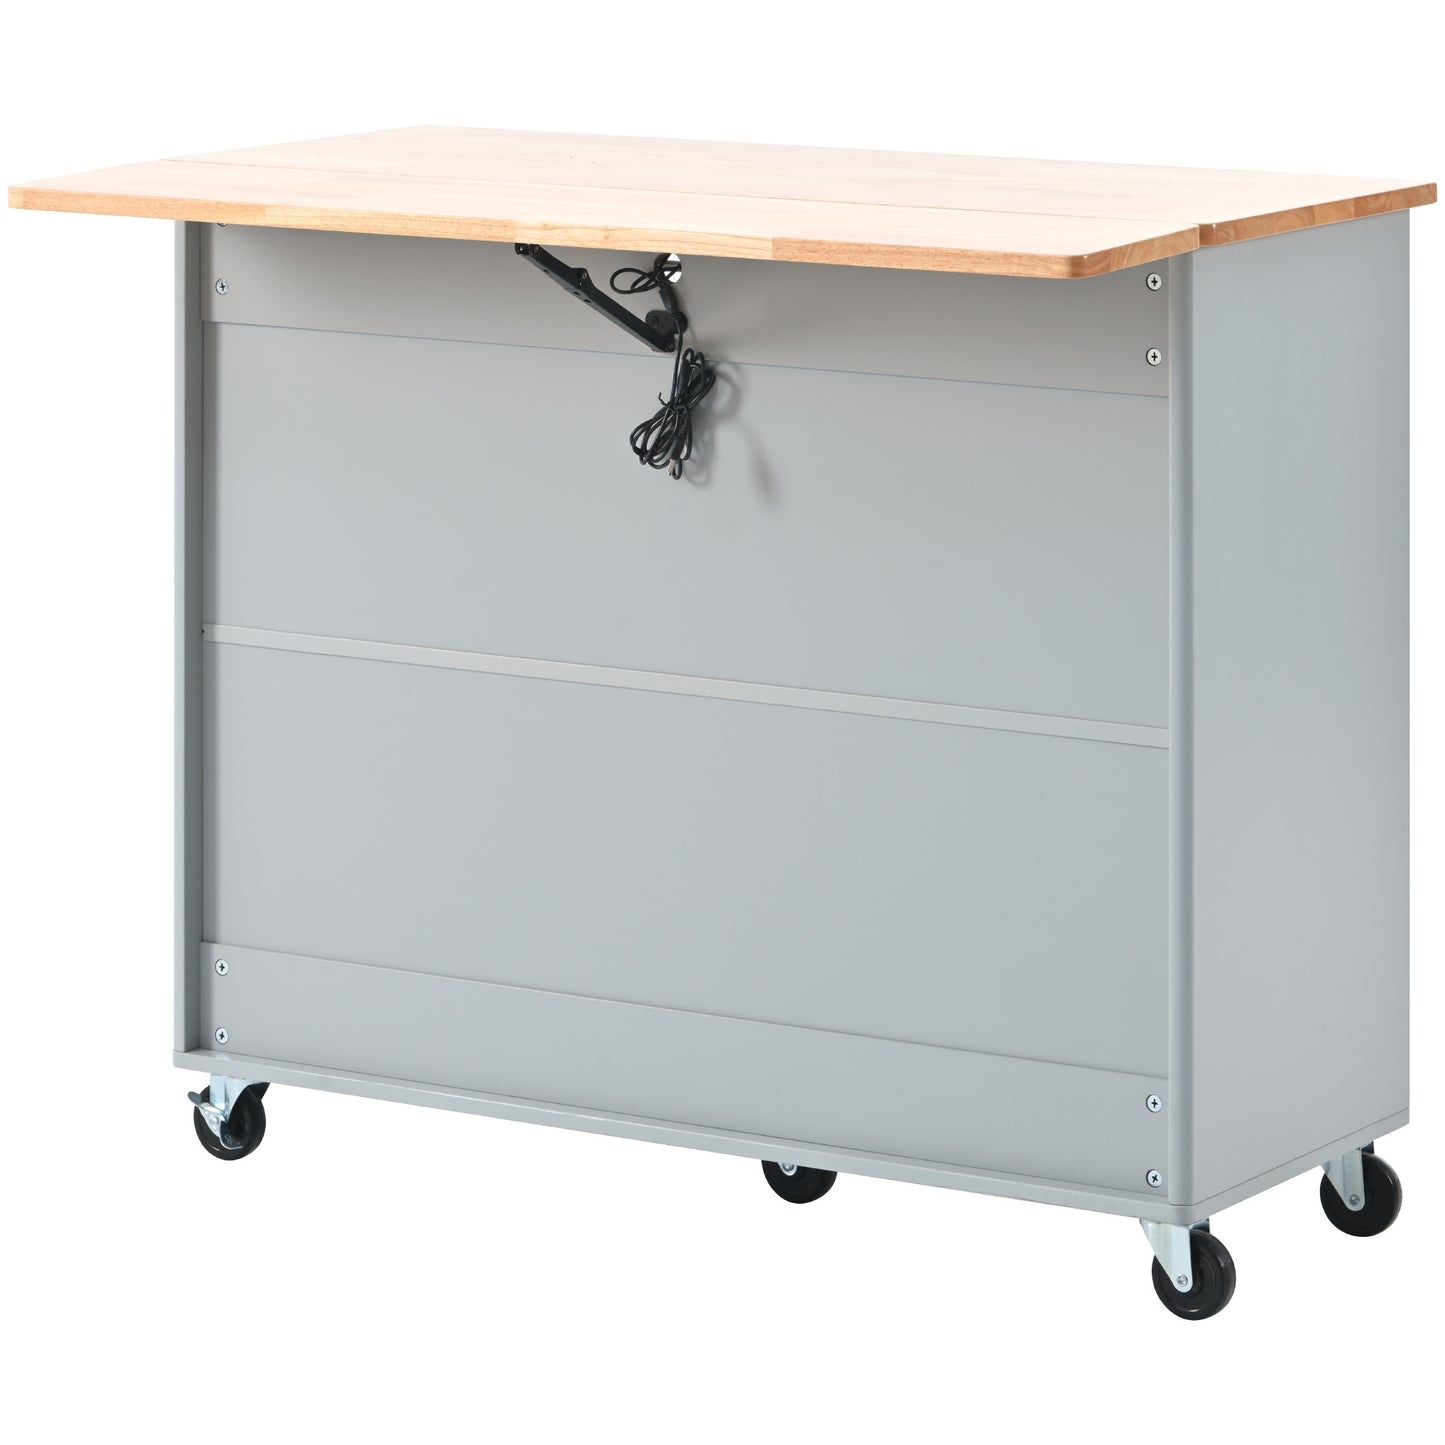 Kitchen Island with Drop Leaf, LED Light Kitchen Cart on Wheels with 2 Fluted Glass Doors and 1 Flip Cabinet Door, Large Kitchen Island Cart with an Adjustable Shelf and 2 Drawers (Grey Blue)